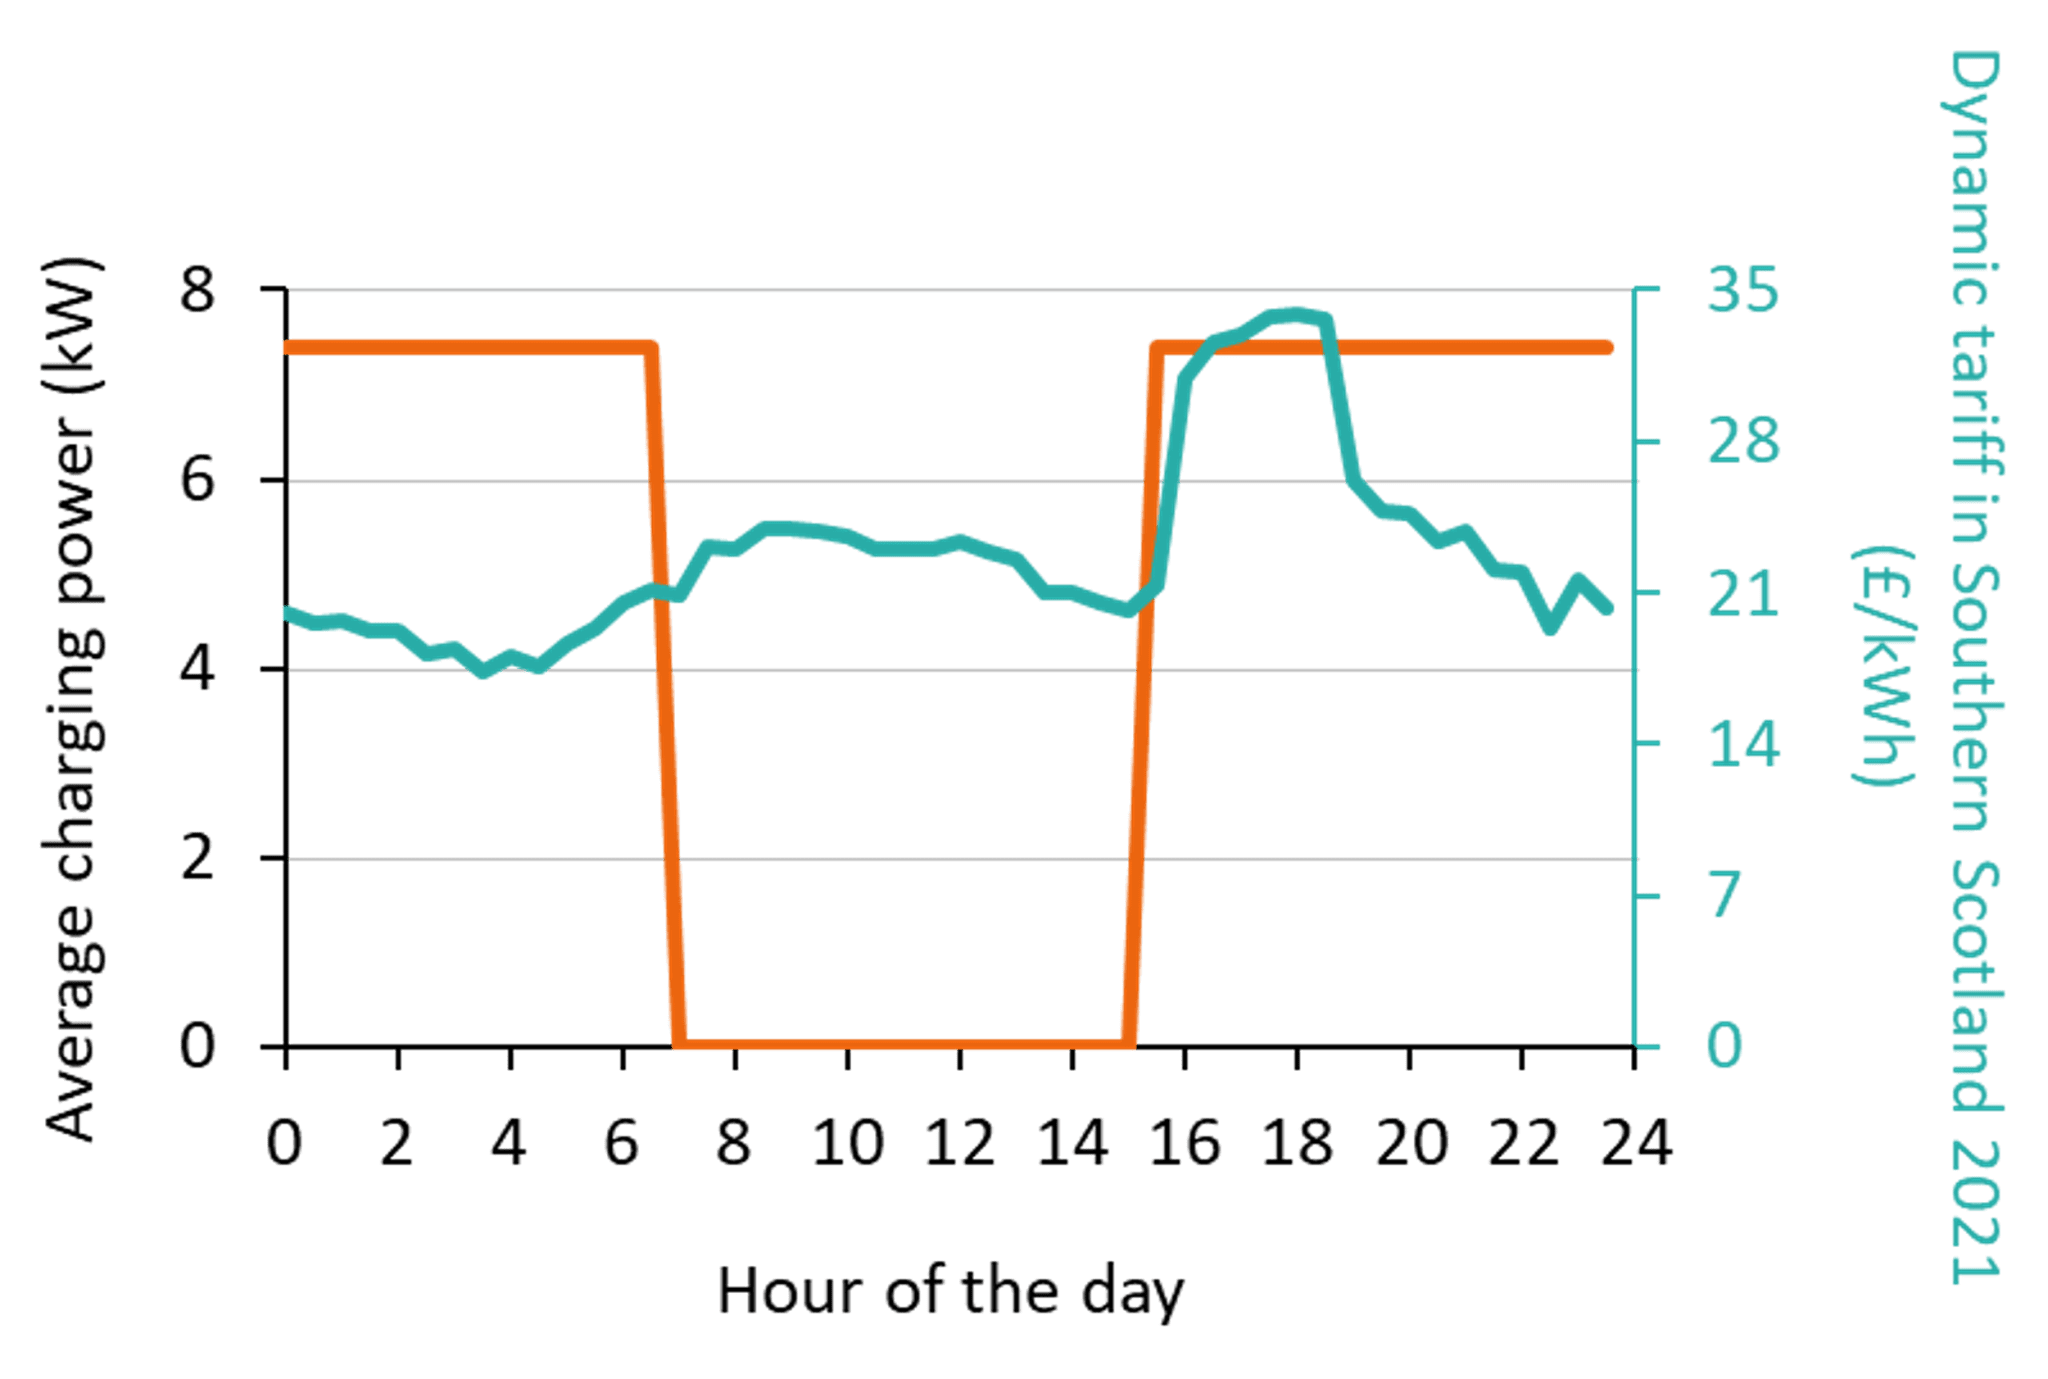 The chart shows the average charging profile of an RCV (orange line corresponding to the left y-axis) with a dynamic tariff (turquoise line corresponding to the right y-axis). 